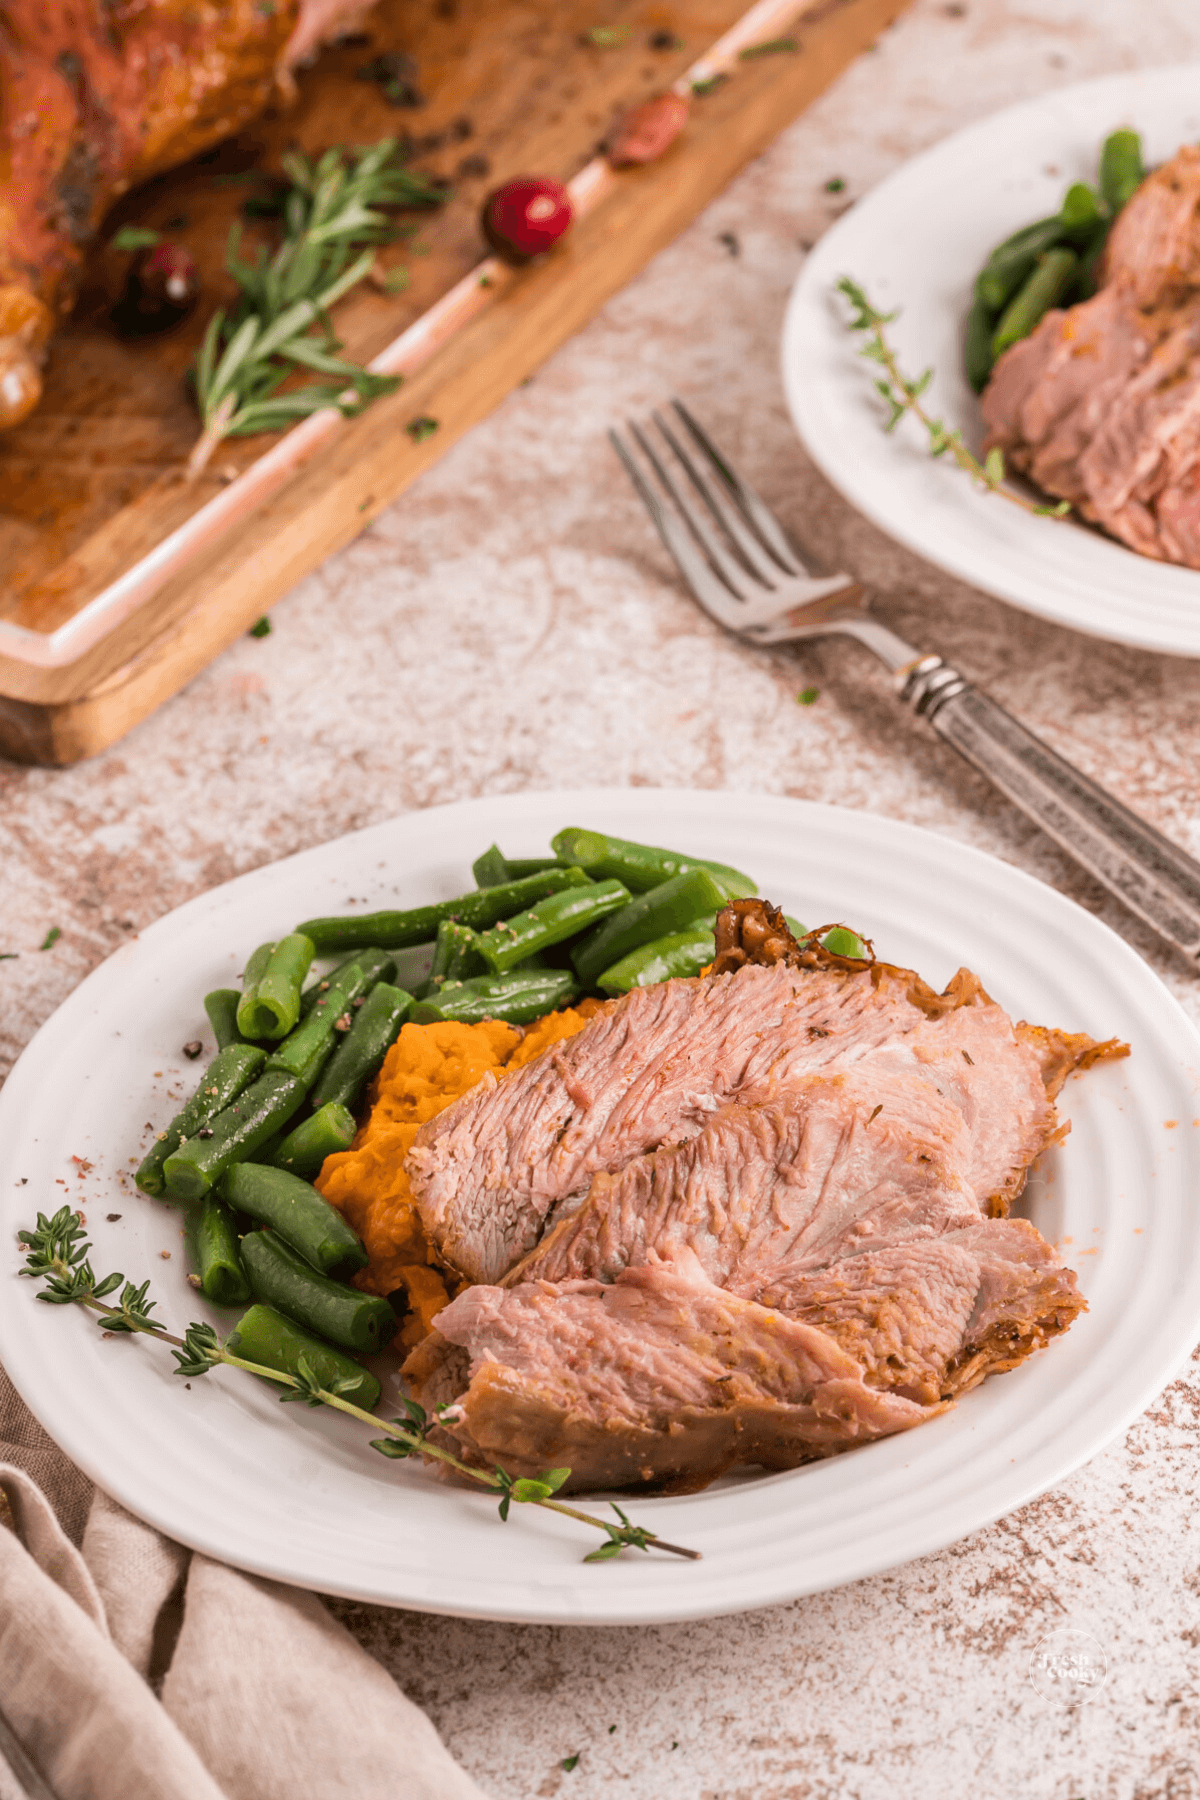 Plates of turkey leg meat and green beans with sweet potatoes.